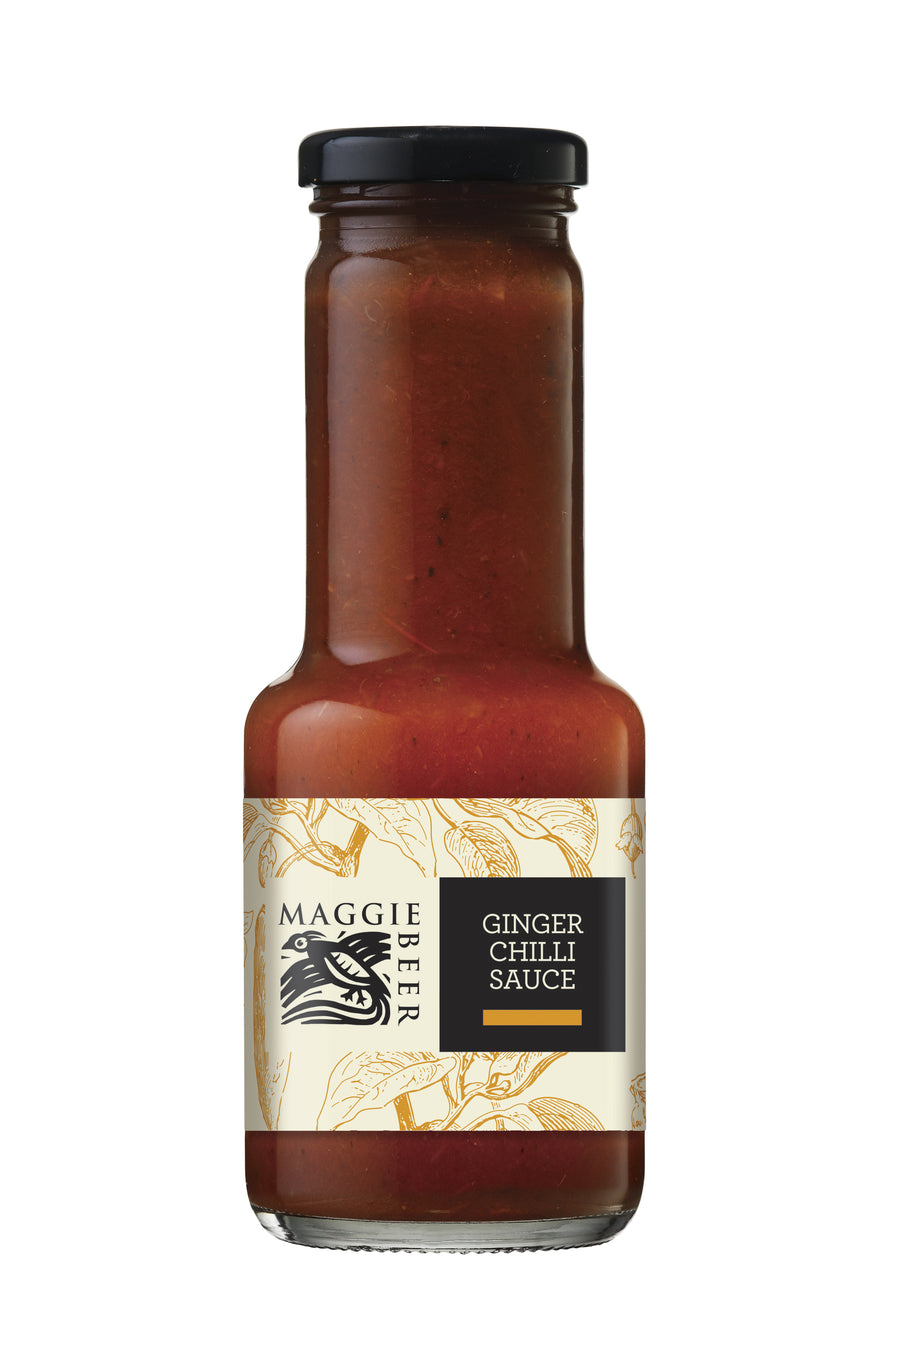 Maggie Beer Ginger Chilli Sauce 6x250g